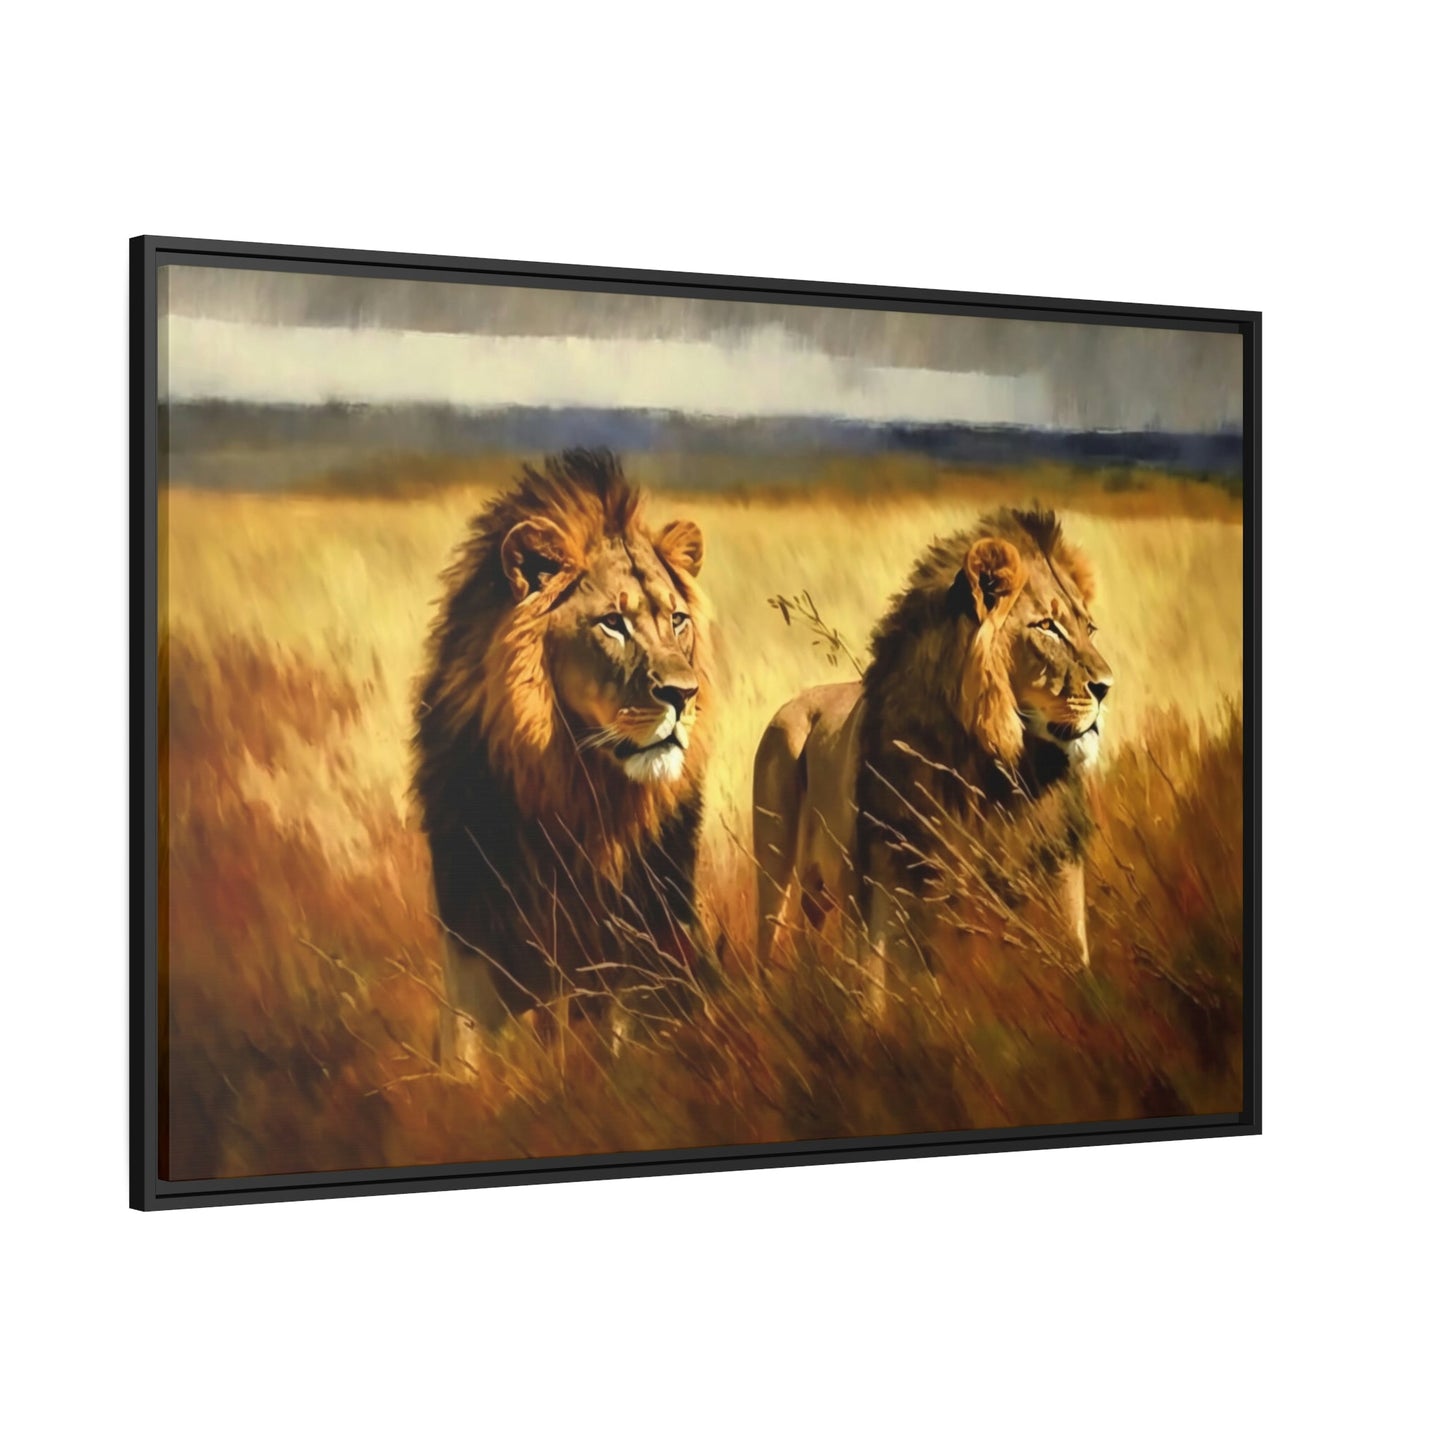 King of Beasts: A Painting of Lions